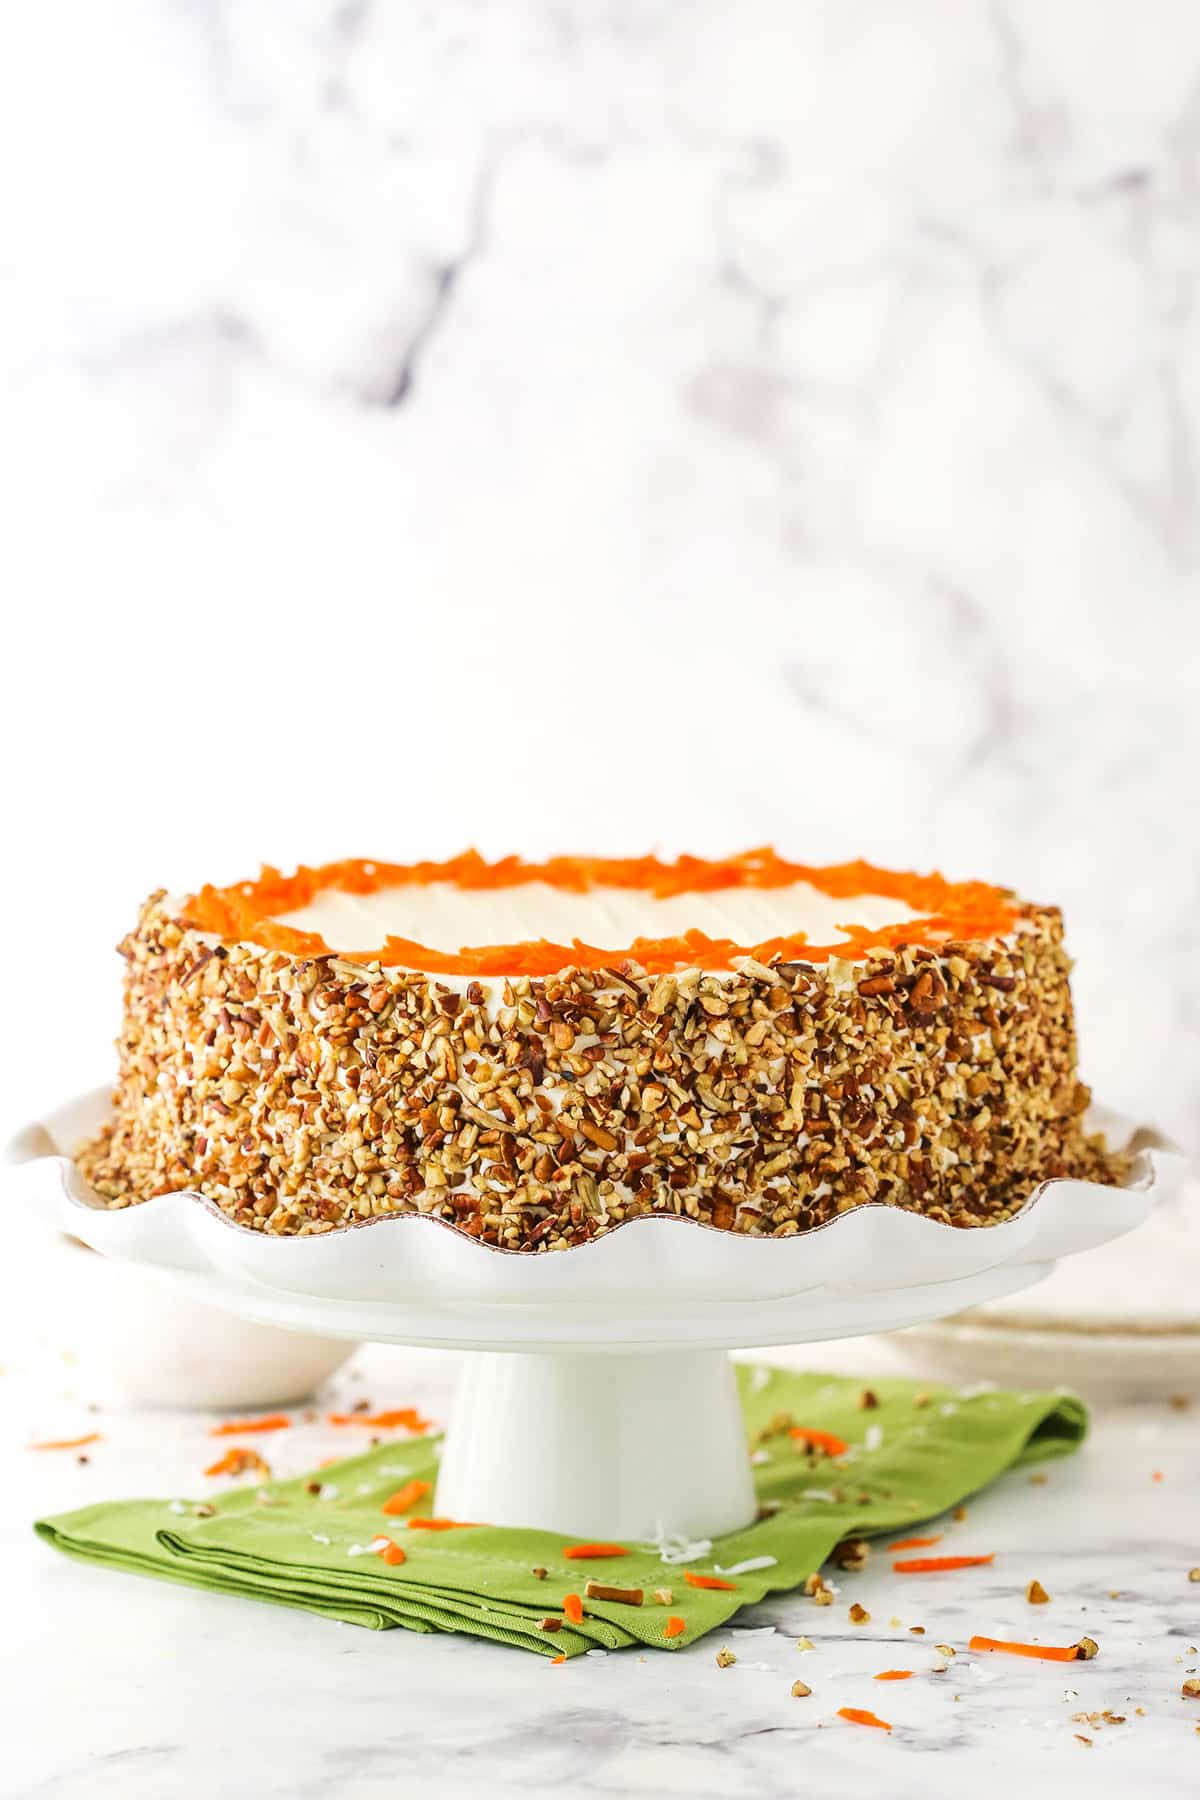 Side view of a full Cheesecake Swirl Carrot Cake on a white cake stand